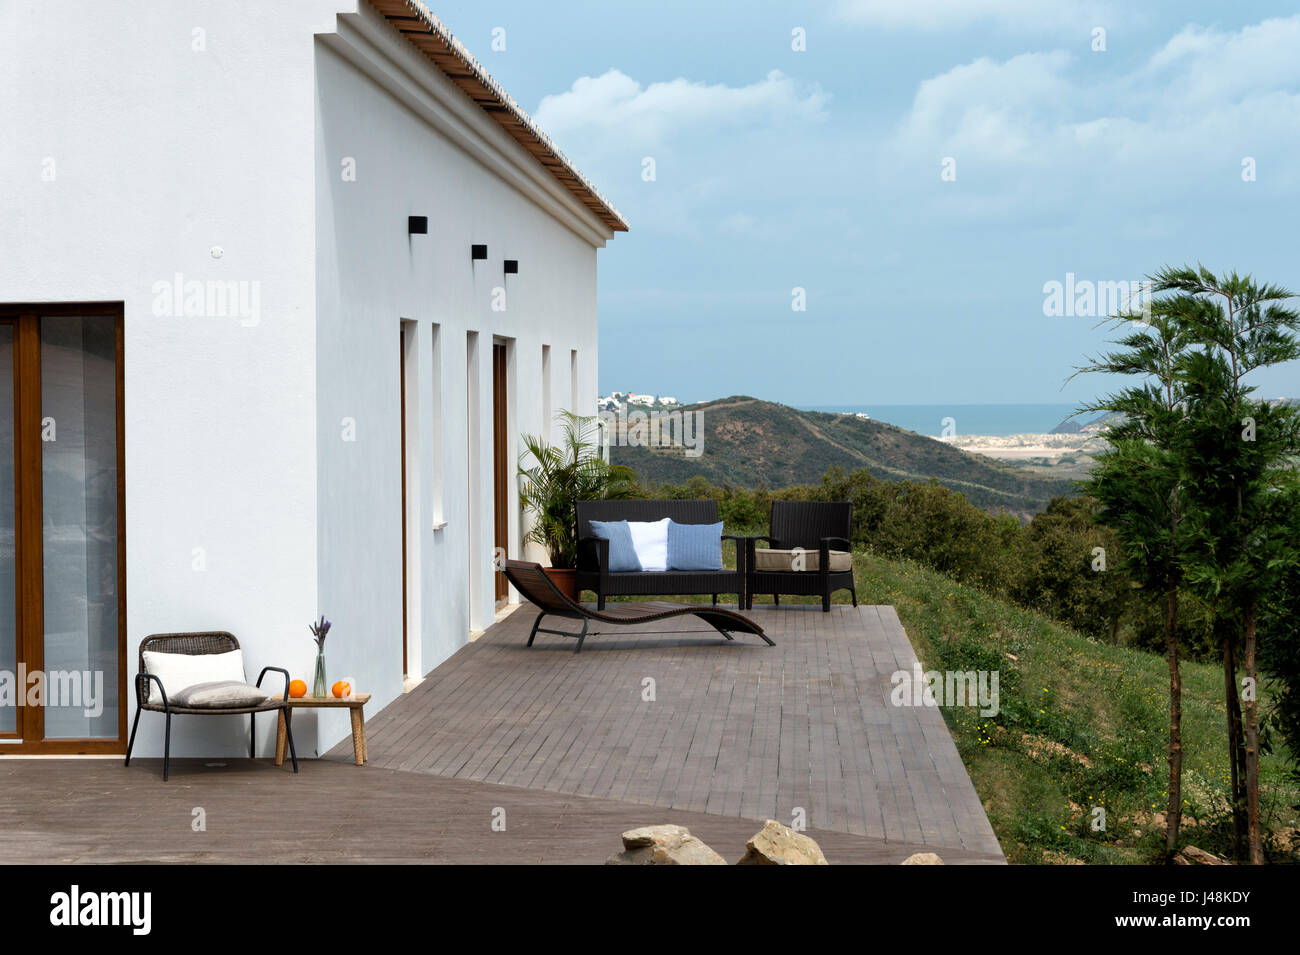 exterior of modern holiday villa set in the hills of western algarve, Portugal, Stock Photo